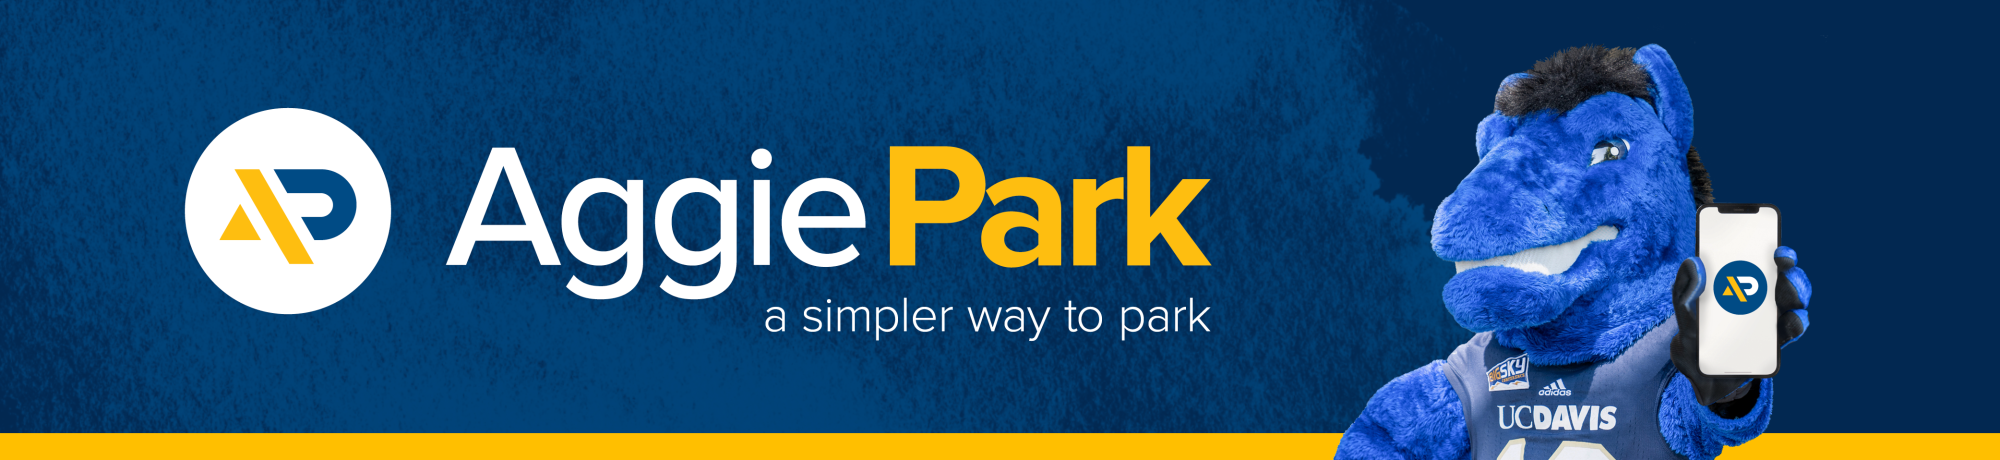 AggiePark - the simpler way to park